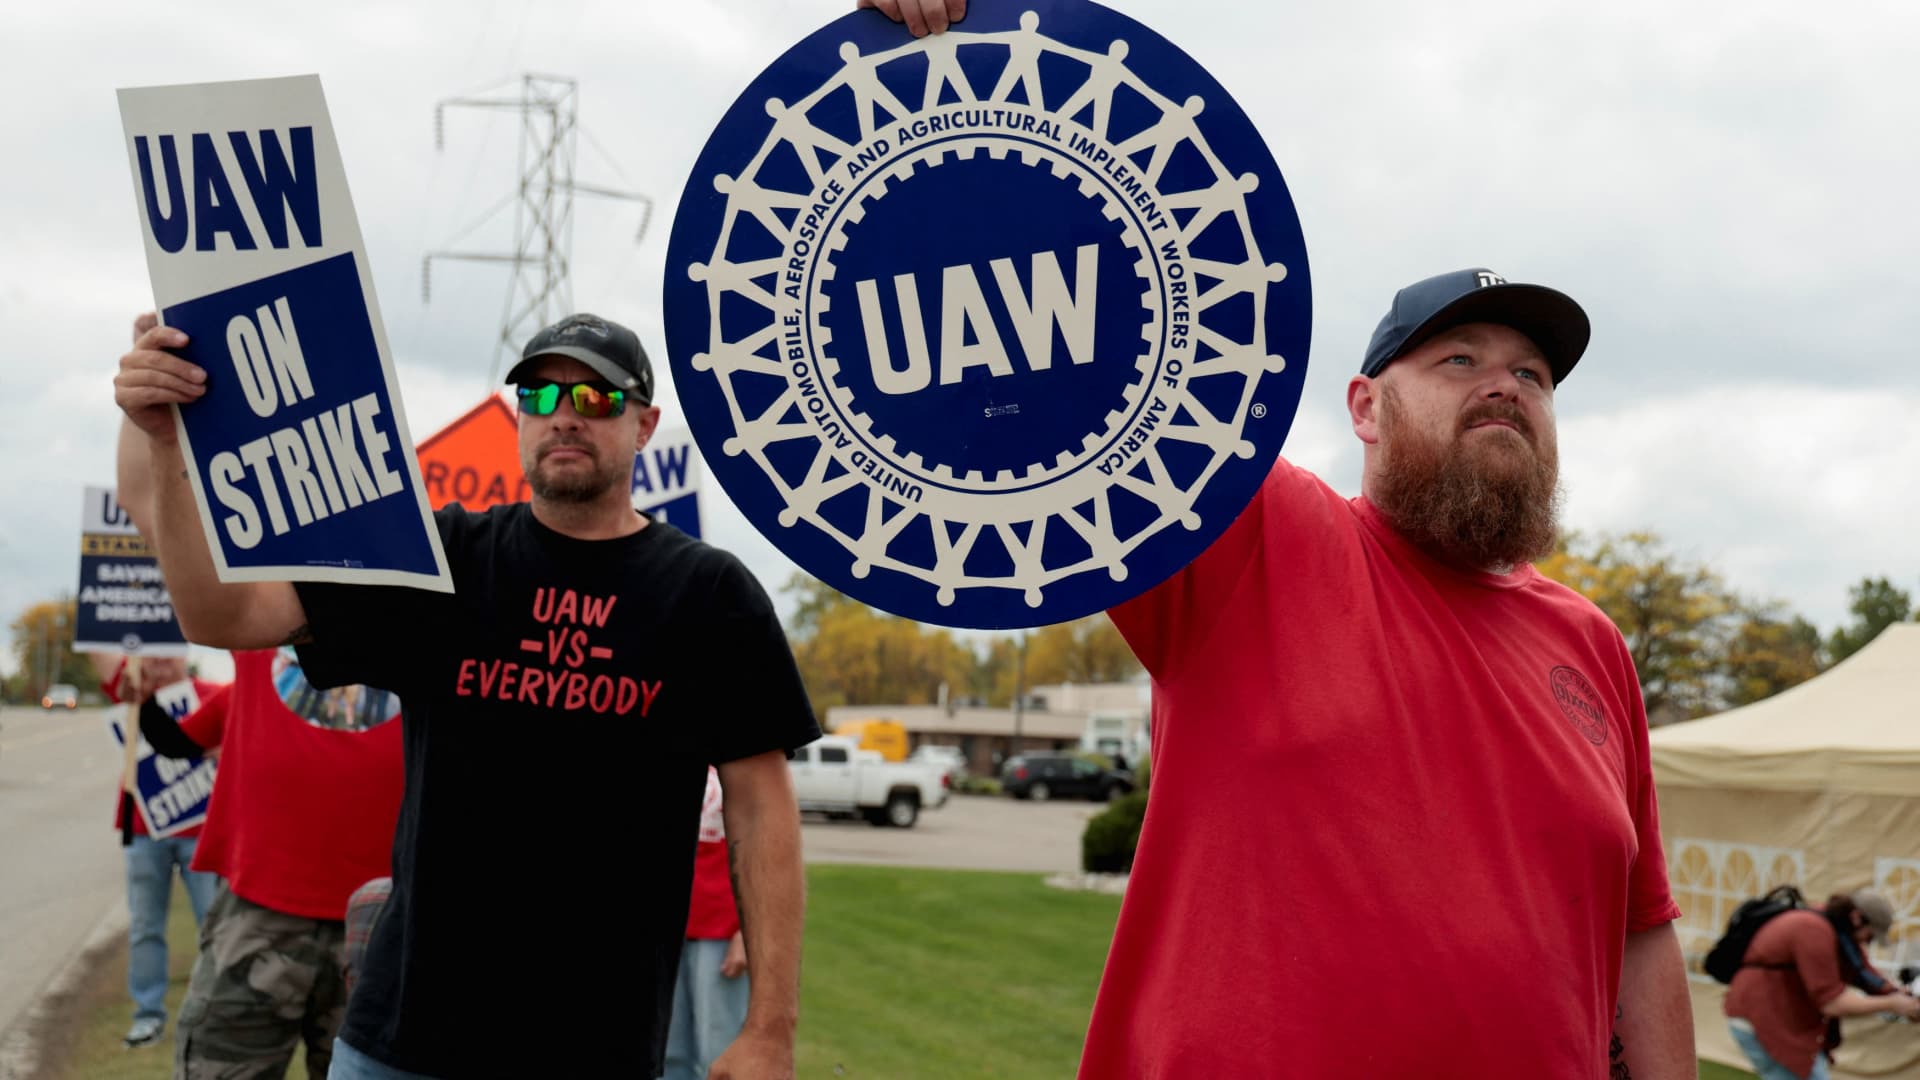 Republican governors from six states condemn UAW campaigns, citing potential for layoffs Auto Recent